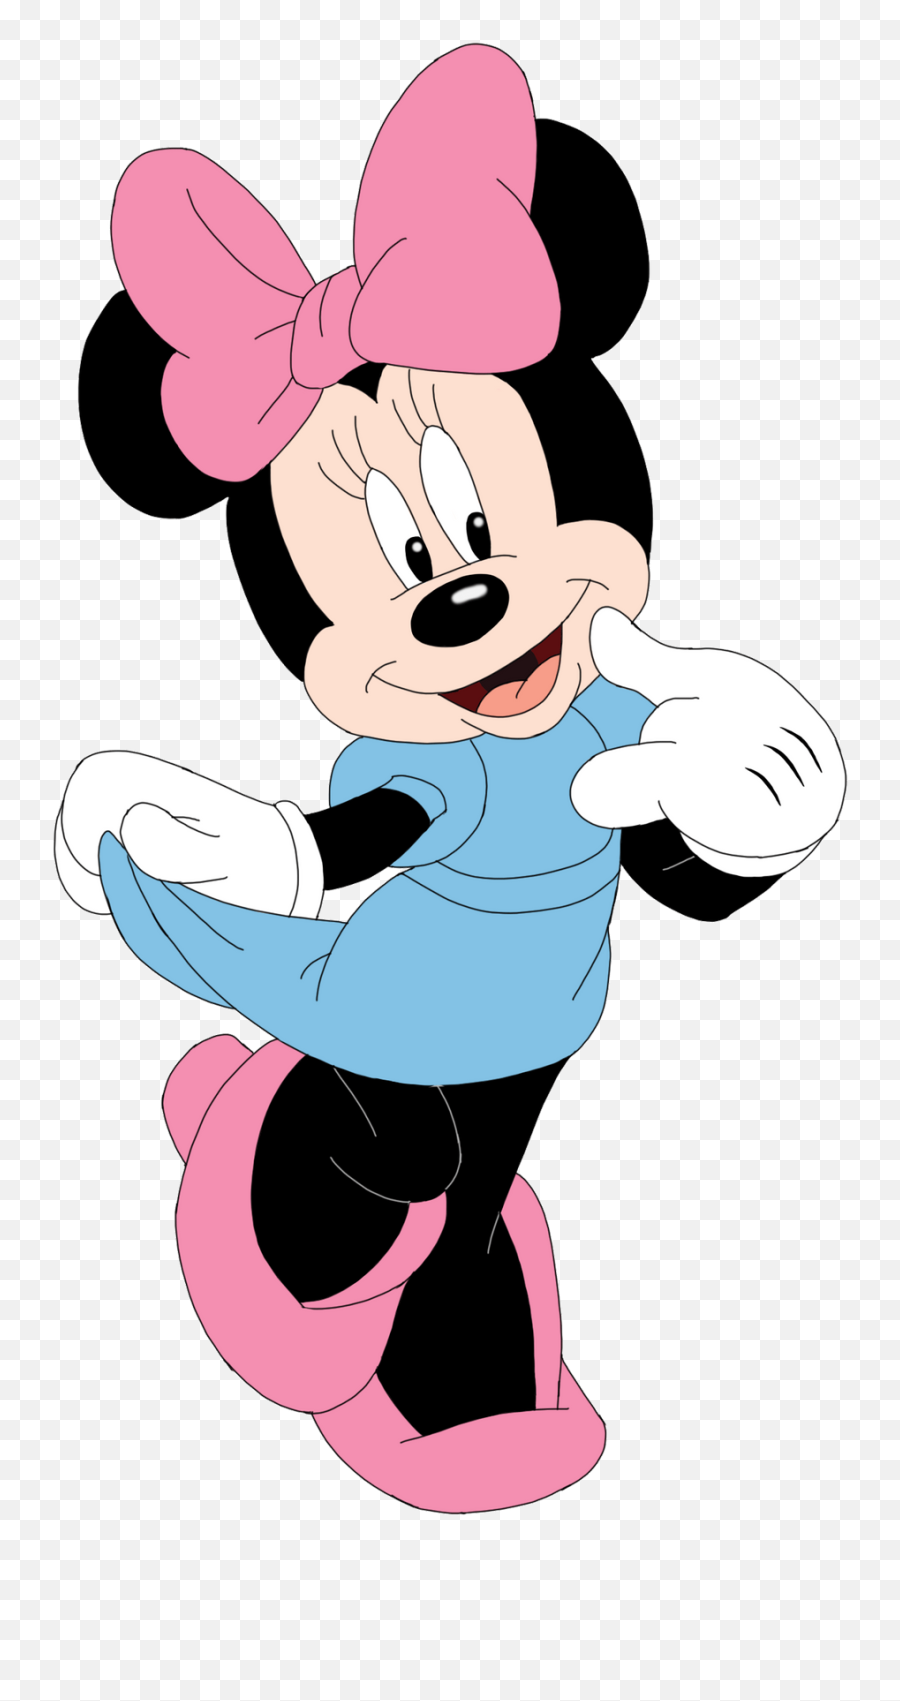 Minnie Png Images Disney Minnie Mouse - Minnie Mouse Emoji,Minnie Mouse Logo